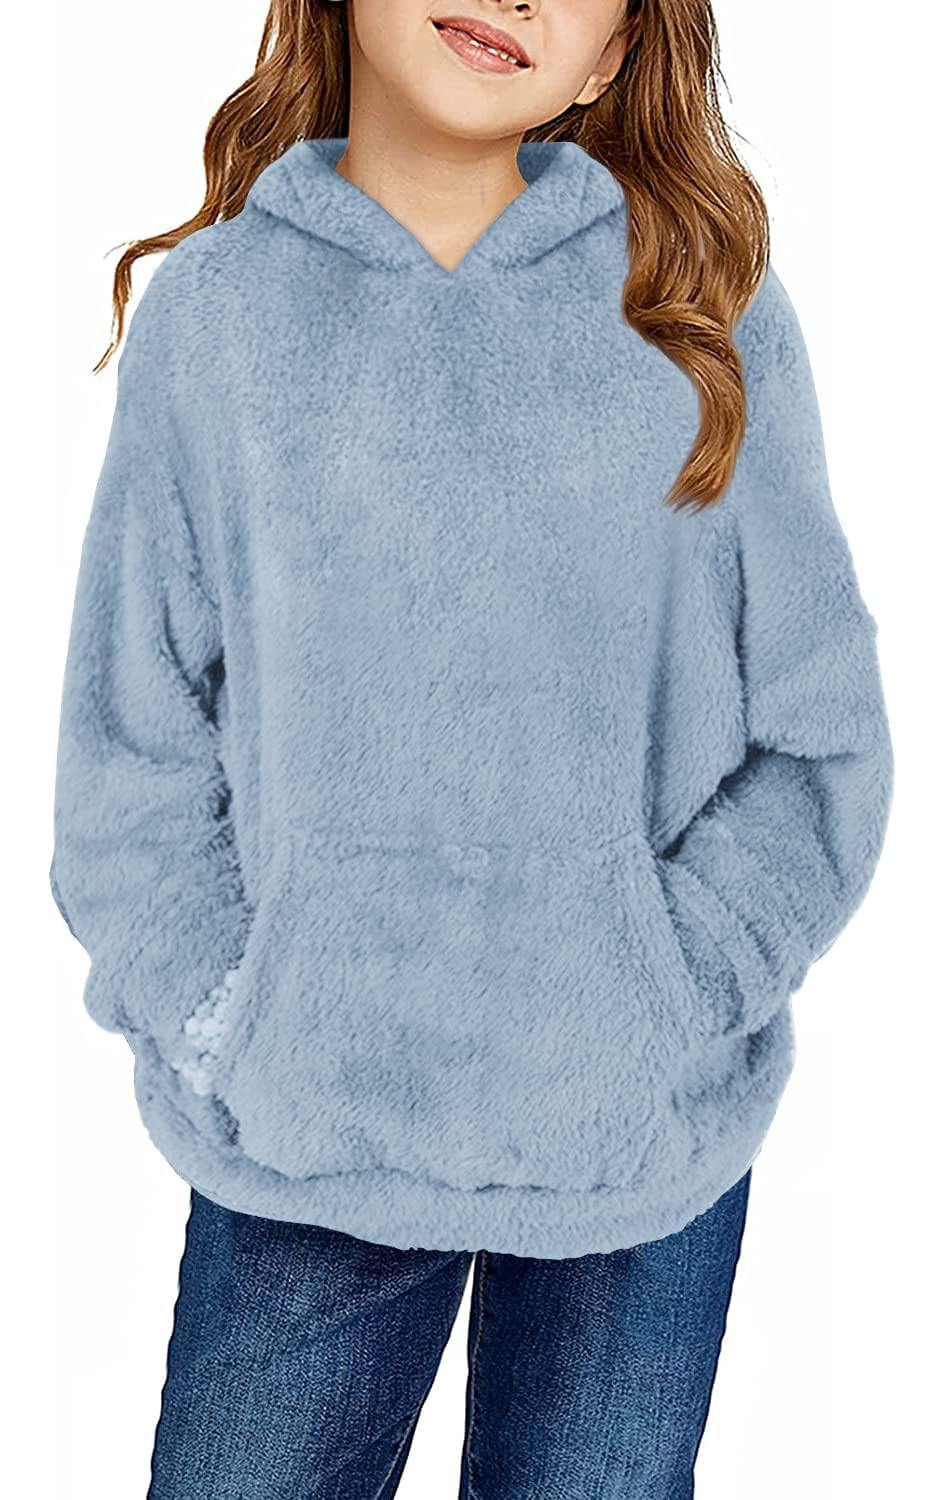 Sherrylily Girls Fuzzy Fleece Pullover Hoodies Sweatshirt Casual Loose  Outwear Coat with Pockets 4-15 Years 